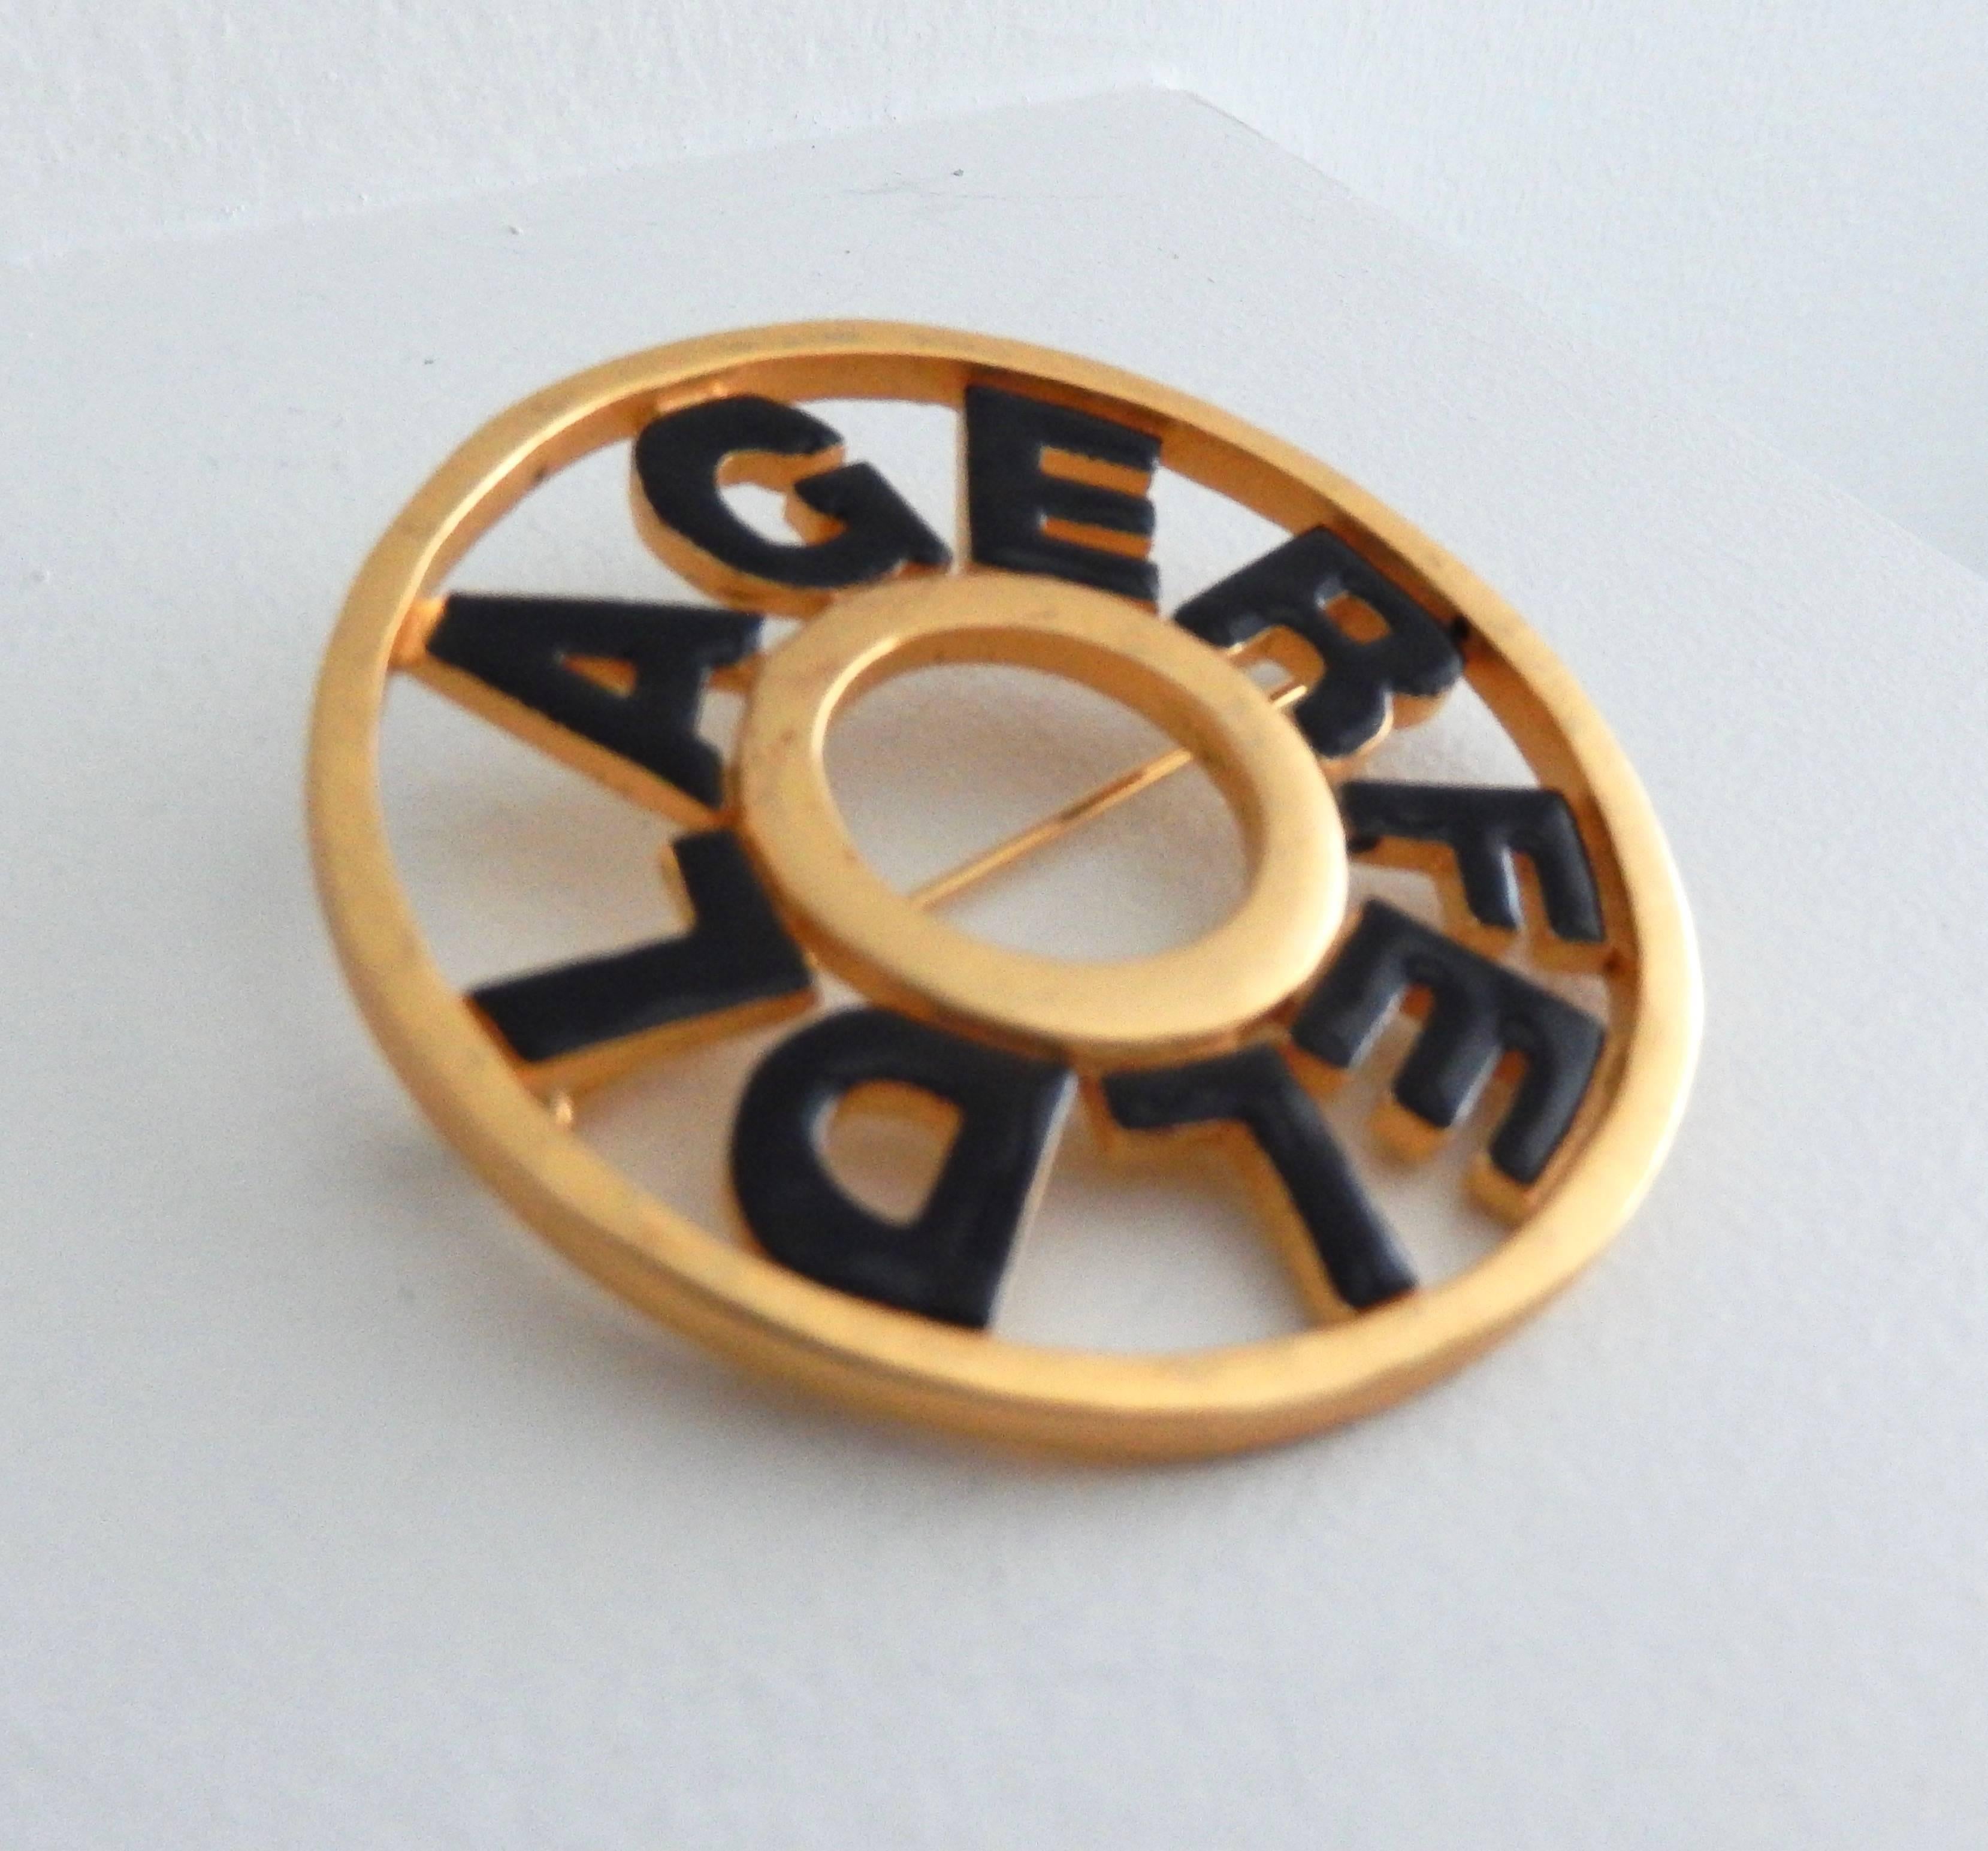 1980s Karl Lagerfeld Signature Gold Tone and Enamel Brooch In Excellent Condition For Sale In Winnetka, IL